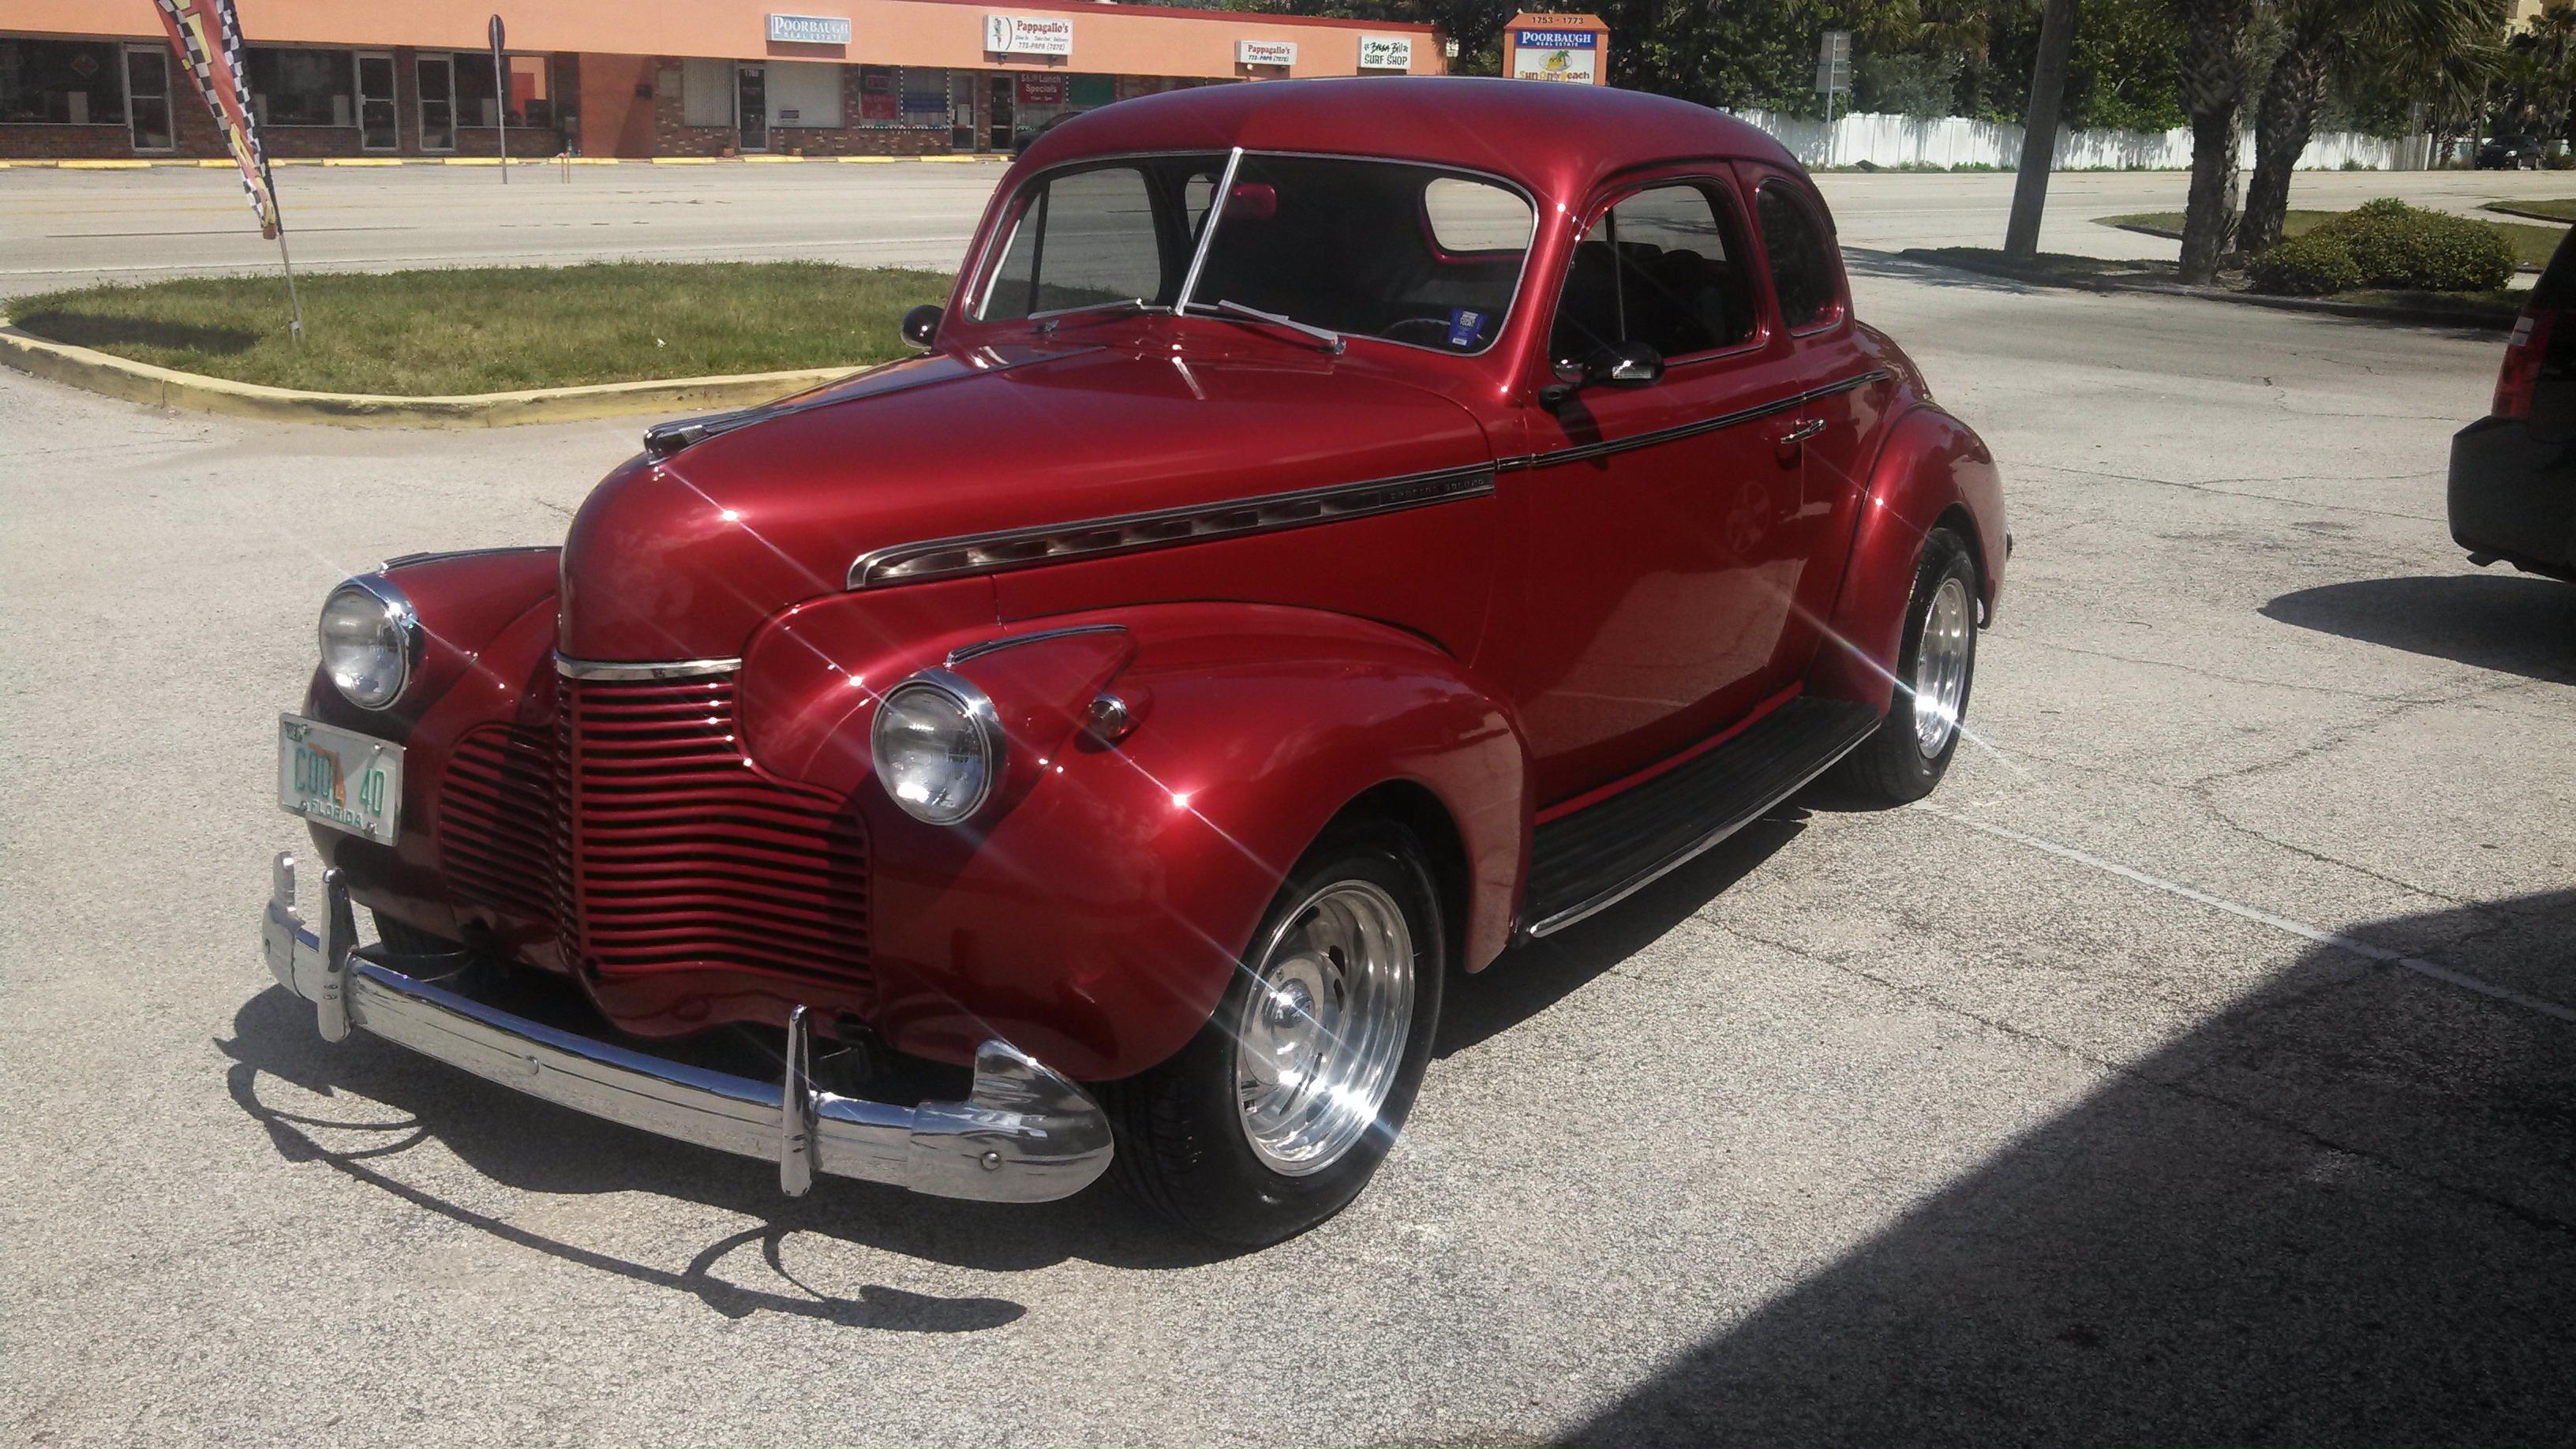 Rich's 1940 Chevy